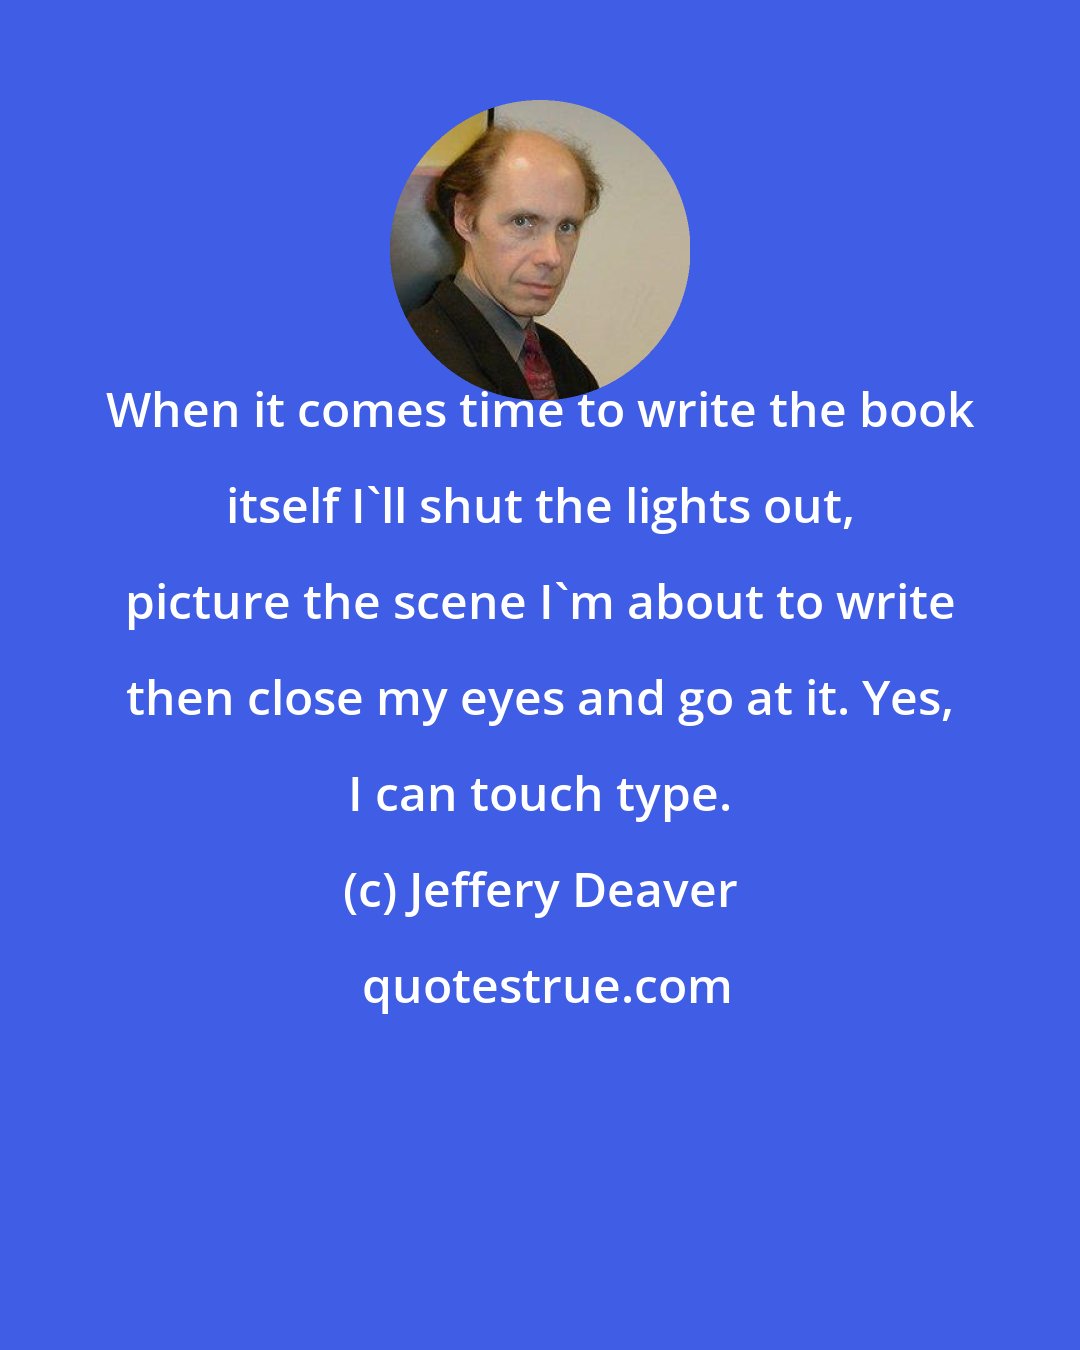 Jeffery Deaver: When it comes time to write the book itself I'll shut the lights out, picture the scene I'm about to write then close my eyes and go at it. Yes, I can touch type.